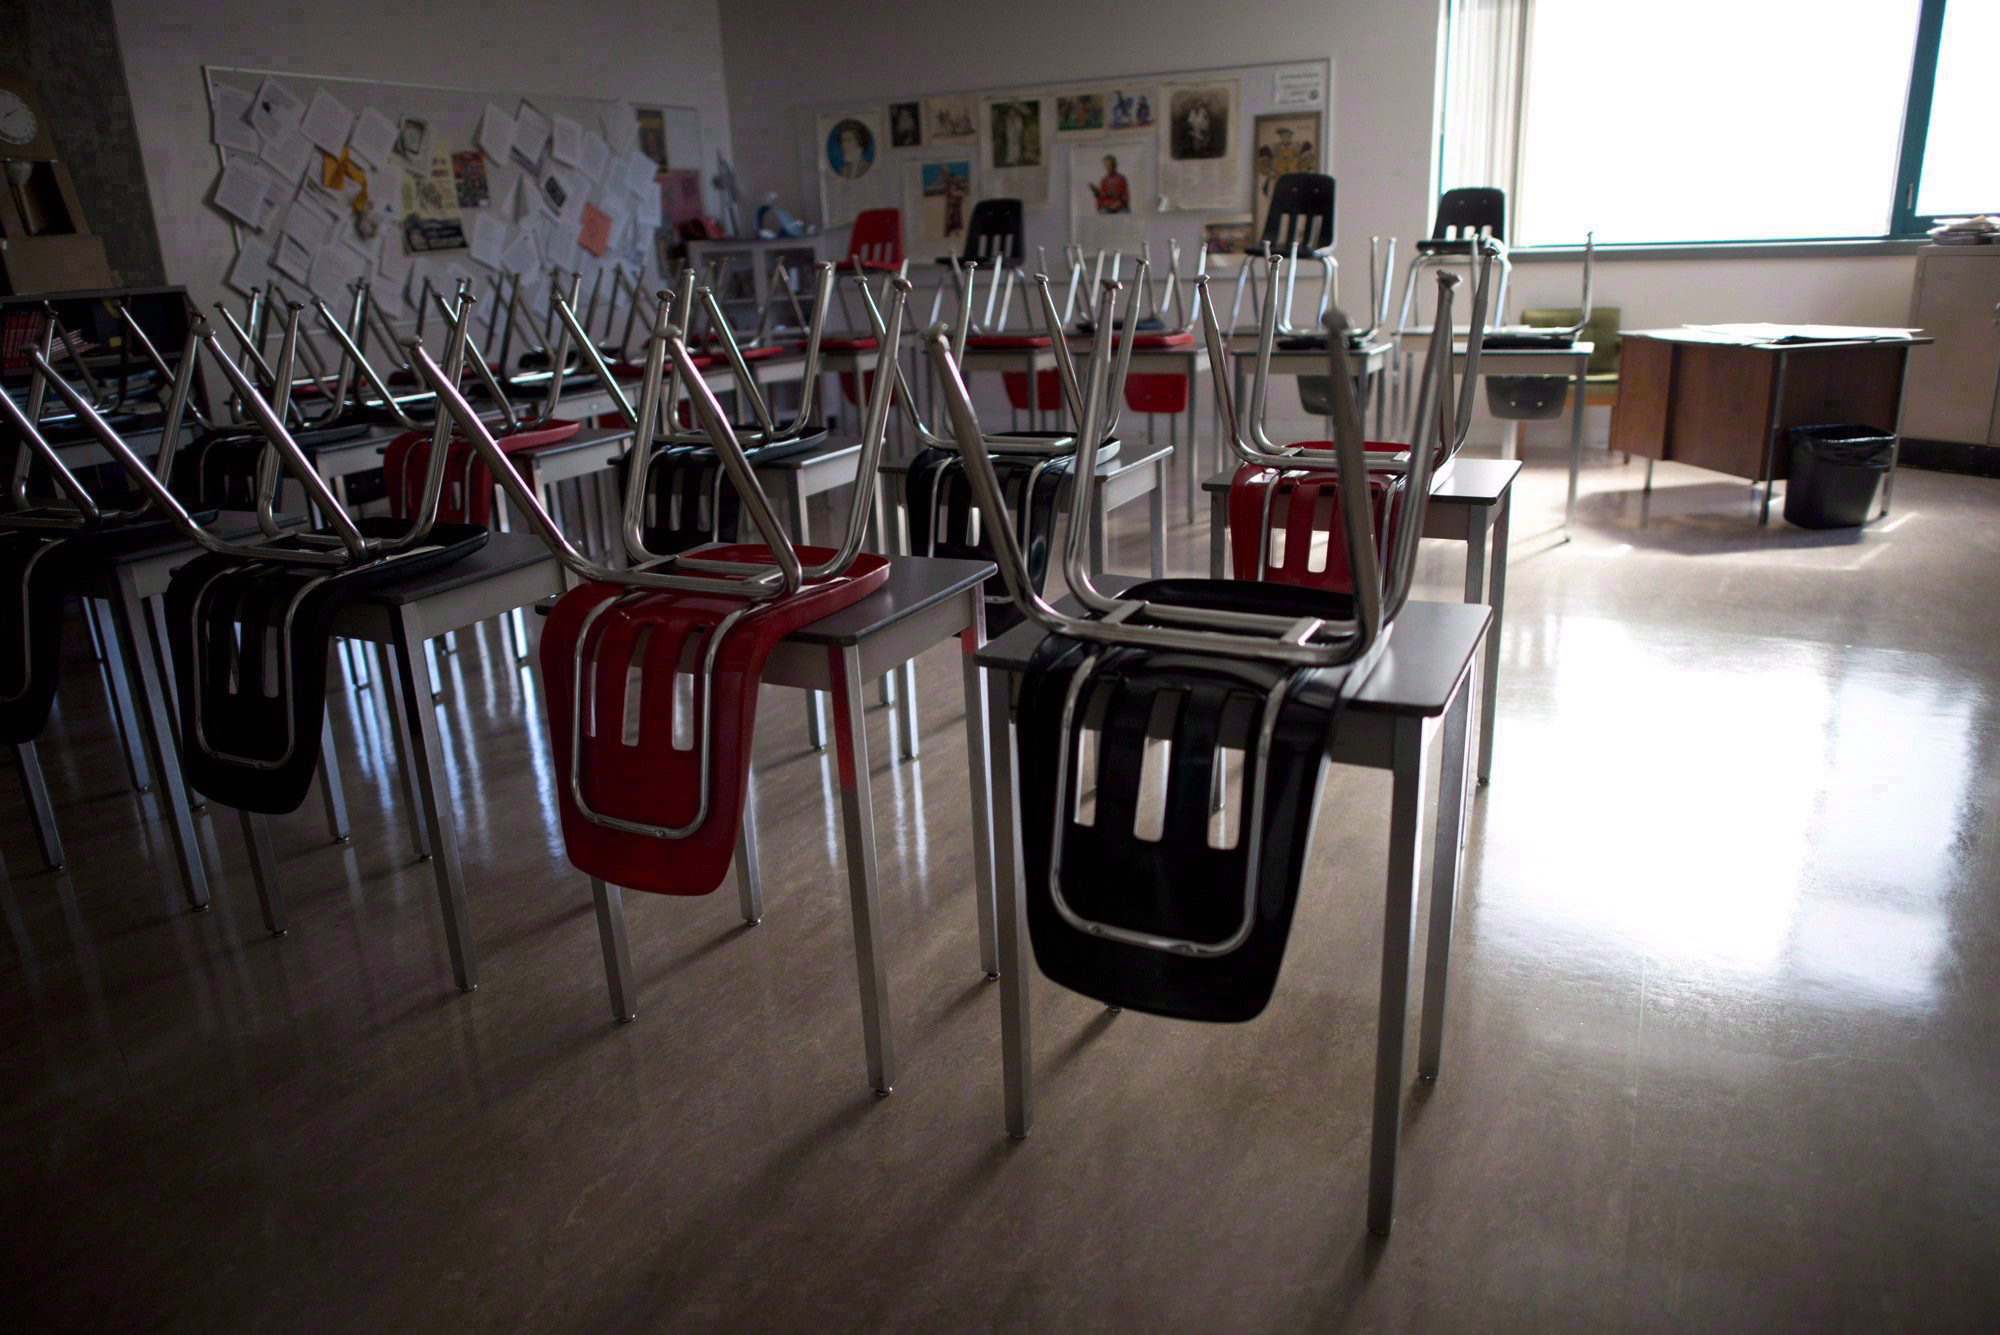 Does class size matter? Educators have their say on a new study’s findings